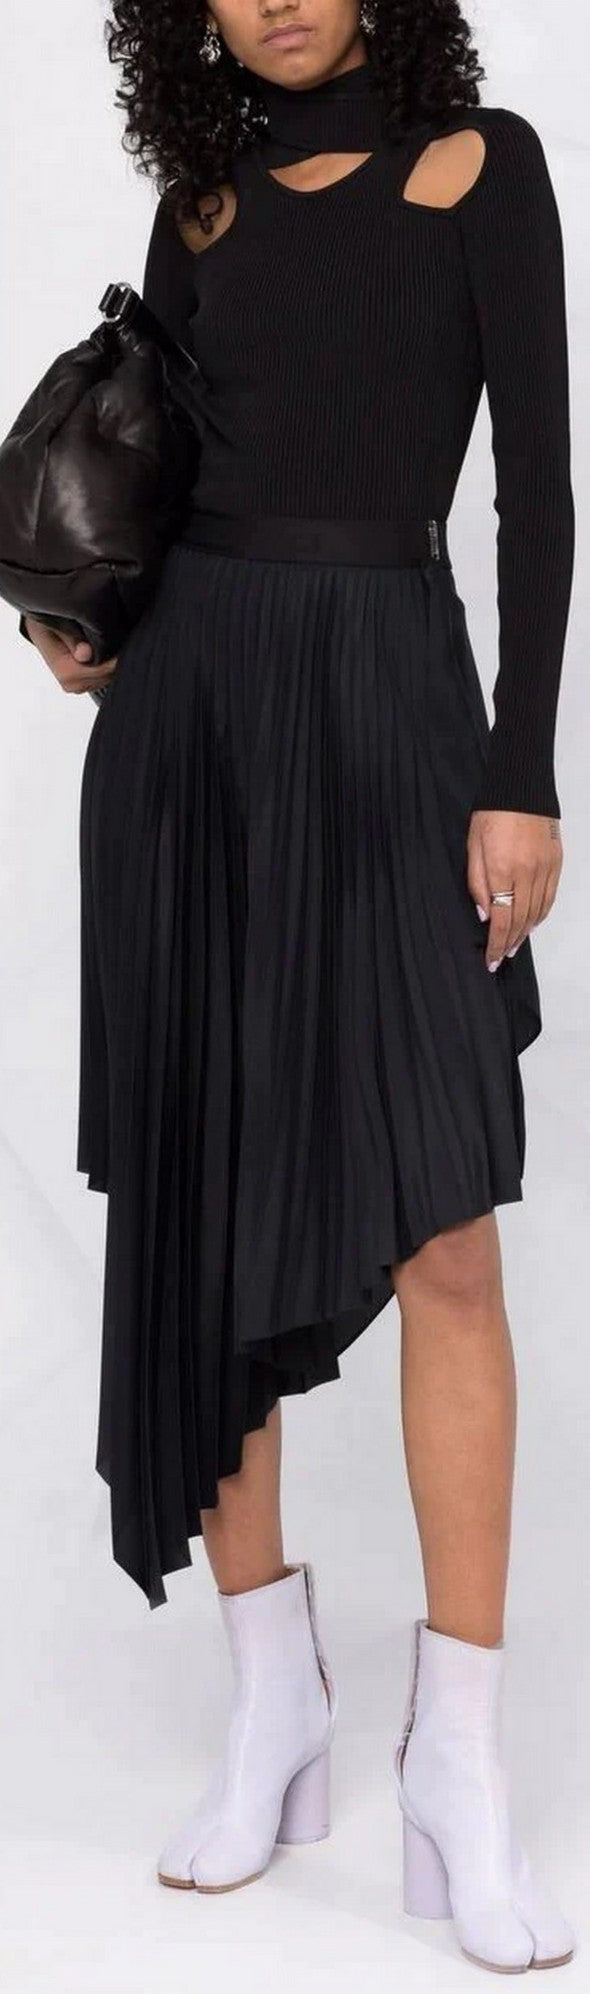 Asymmetric Pleated Skirt, Black Inspired Fashions Boutique